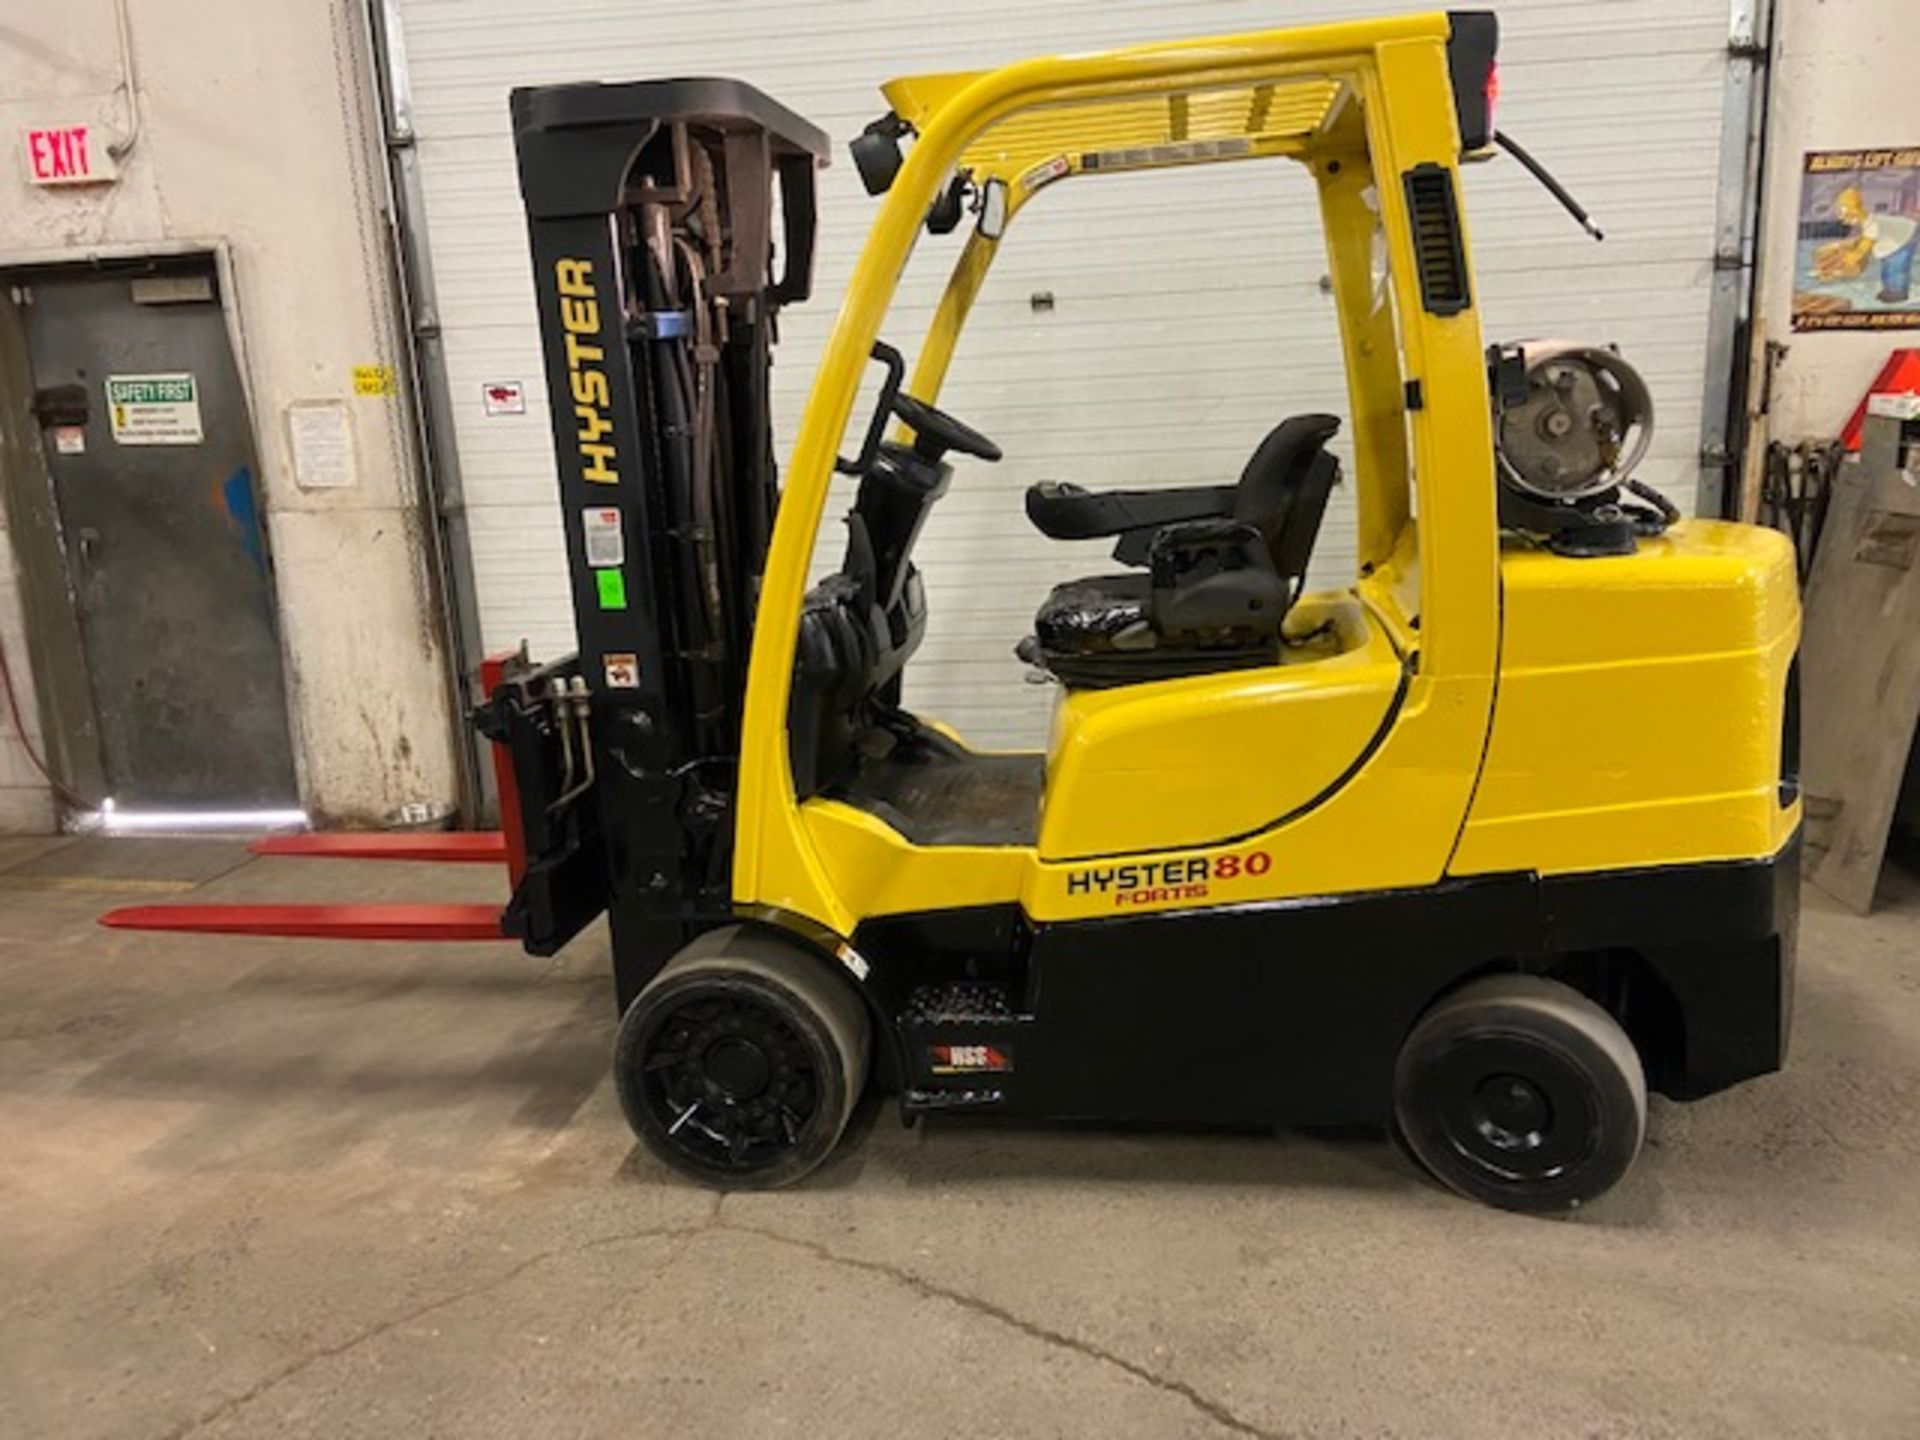 FREE CUSTOMS - 2014 Hyster 8000lbs Capacity Forklift LPG (Propane) with sideshift and 3 stage mast